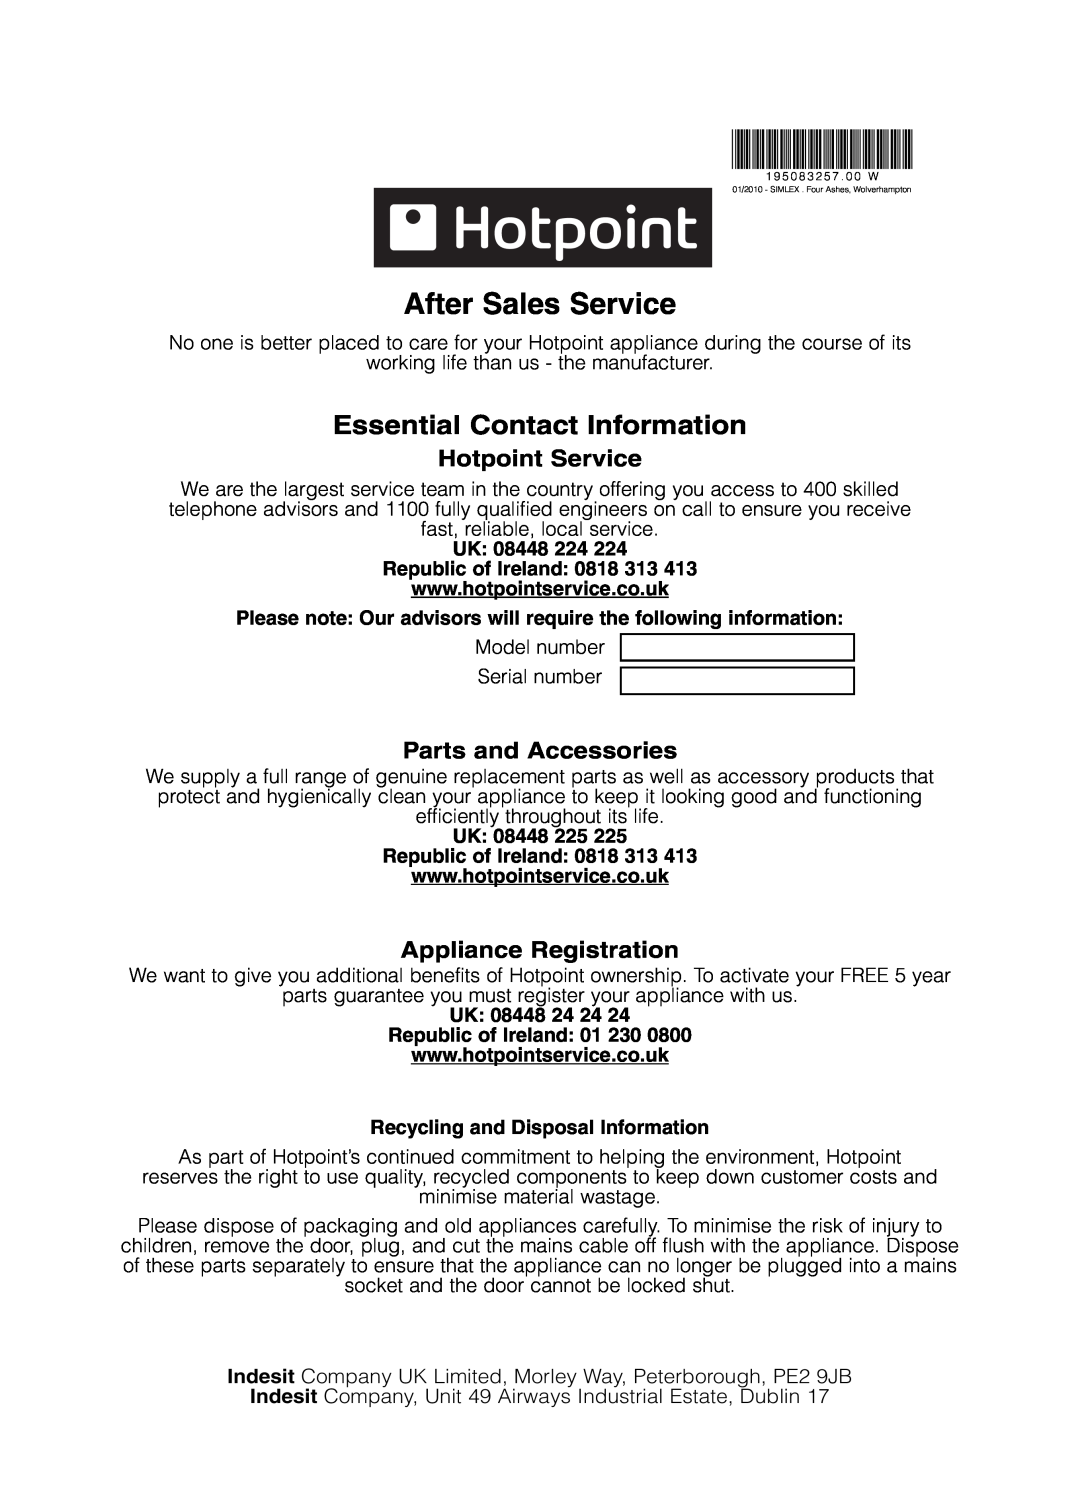 Hotpoint TVF770 manual After Sales Service, Hotpoint Service, Parts and Accessories, Appliance Registration 